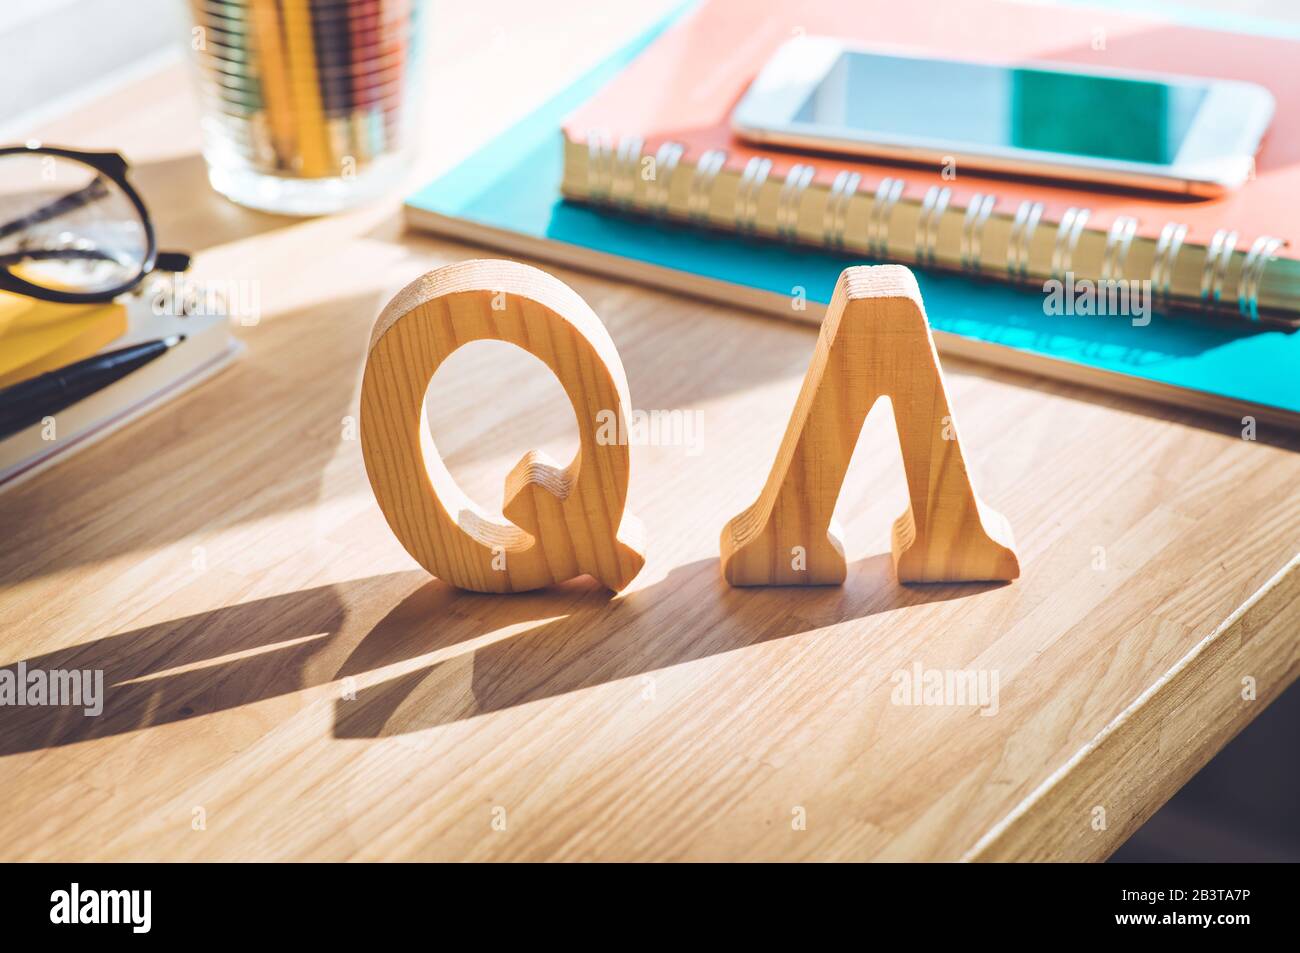 Q & A concepts with mock up letter on desk table.business solution ideas Stock Photo